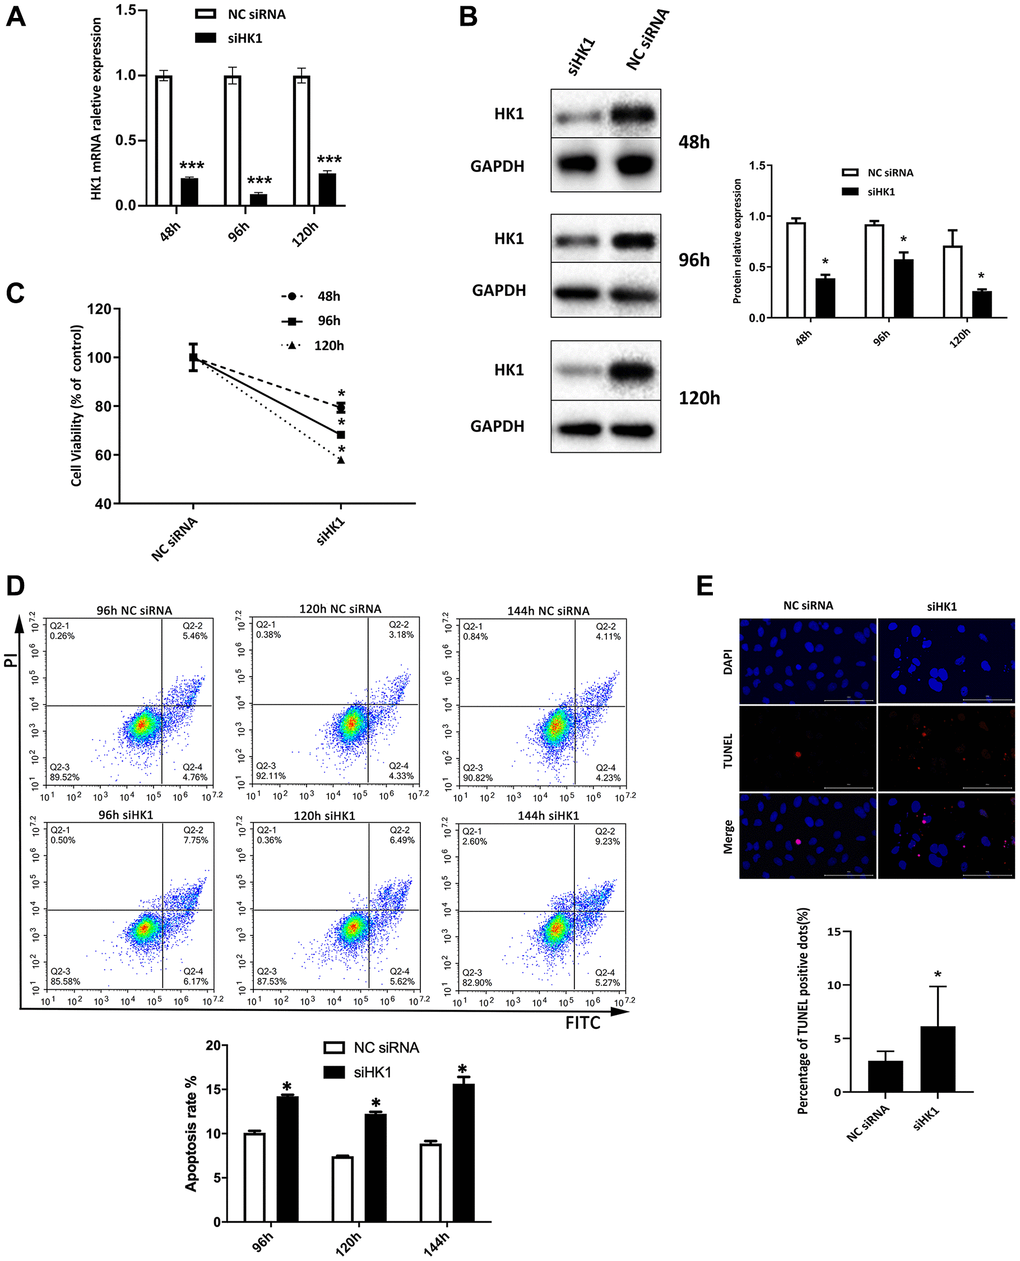 Downregulation in HK1 expression suppresses the proliferation and induces the apoptosis of SRA01/04 cells. (A) SRA01/04 cells were transfected with siRNA HK1, and the effect of siHK1 on HK1 expression in mRNA level was detected by RT-qPCR assay. (B) SRA01/04 cells were performed as A, and the effect of siHK1 on HK1 expression at the protein level was analyzed by western blot. (C) SRA01/04 cells were performed as A, the viability of cells was assessed at 48 h, 96 h, and 120 h by CCK-8 after transfected. (D) SRA01/04 cells were performed as A, cell apoptosis was assessed at 96 h, 120 h, and 144 h and was detected by flow cytometry. (E) SRA01/04 cells were performed as A, cell apoptosis at 120 h by TUNEL assay. Scale bars: 100 μm. *P ***P 